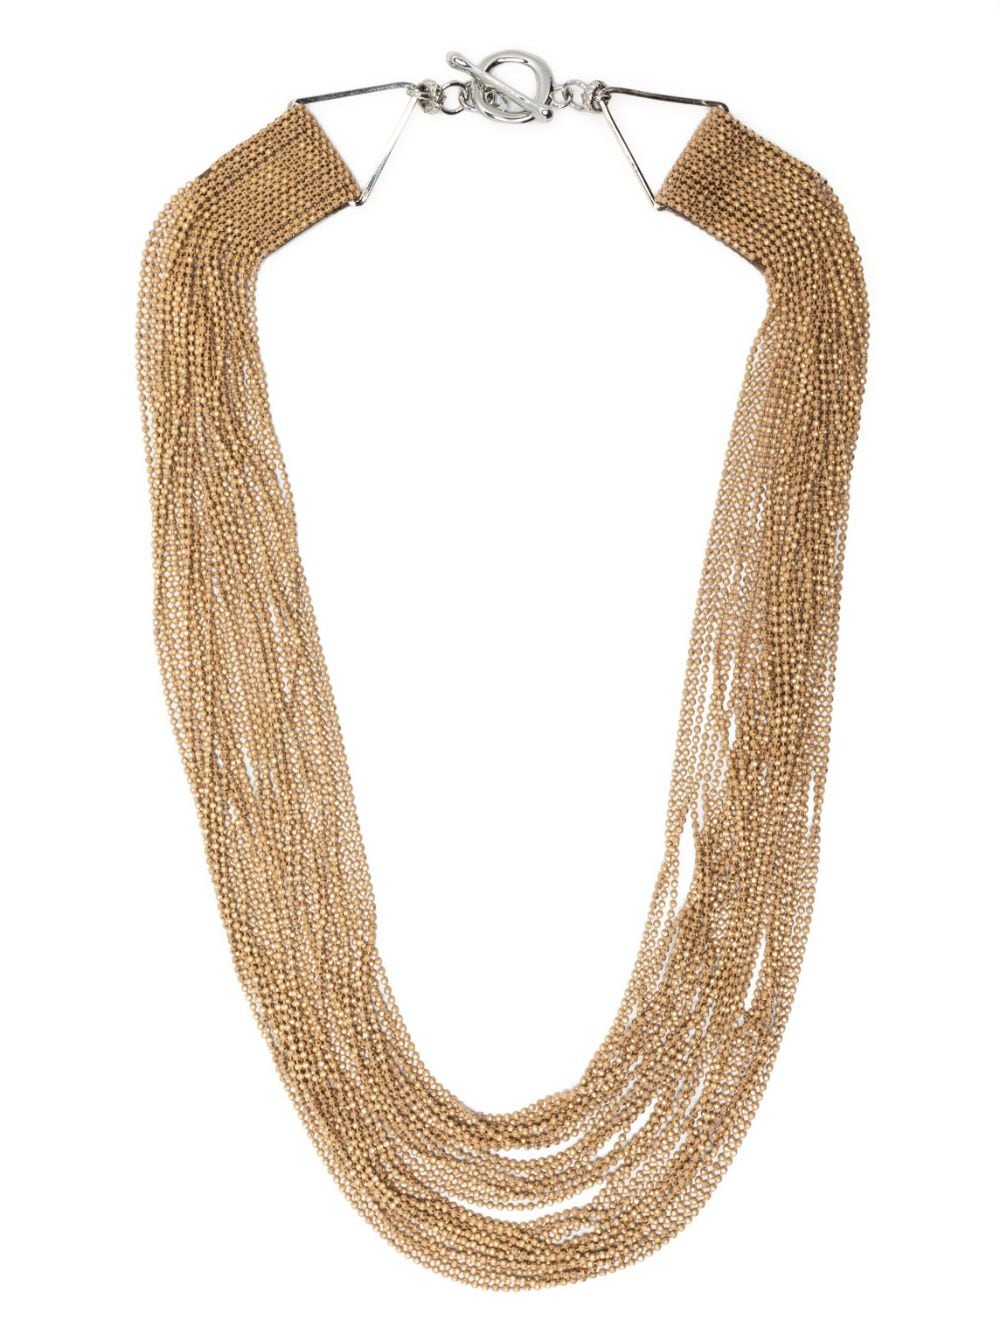 bead-chain necklace